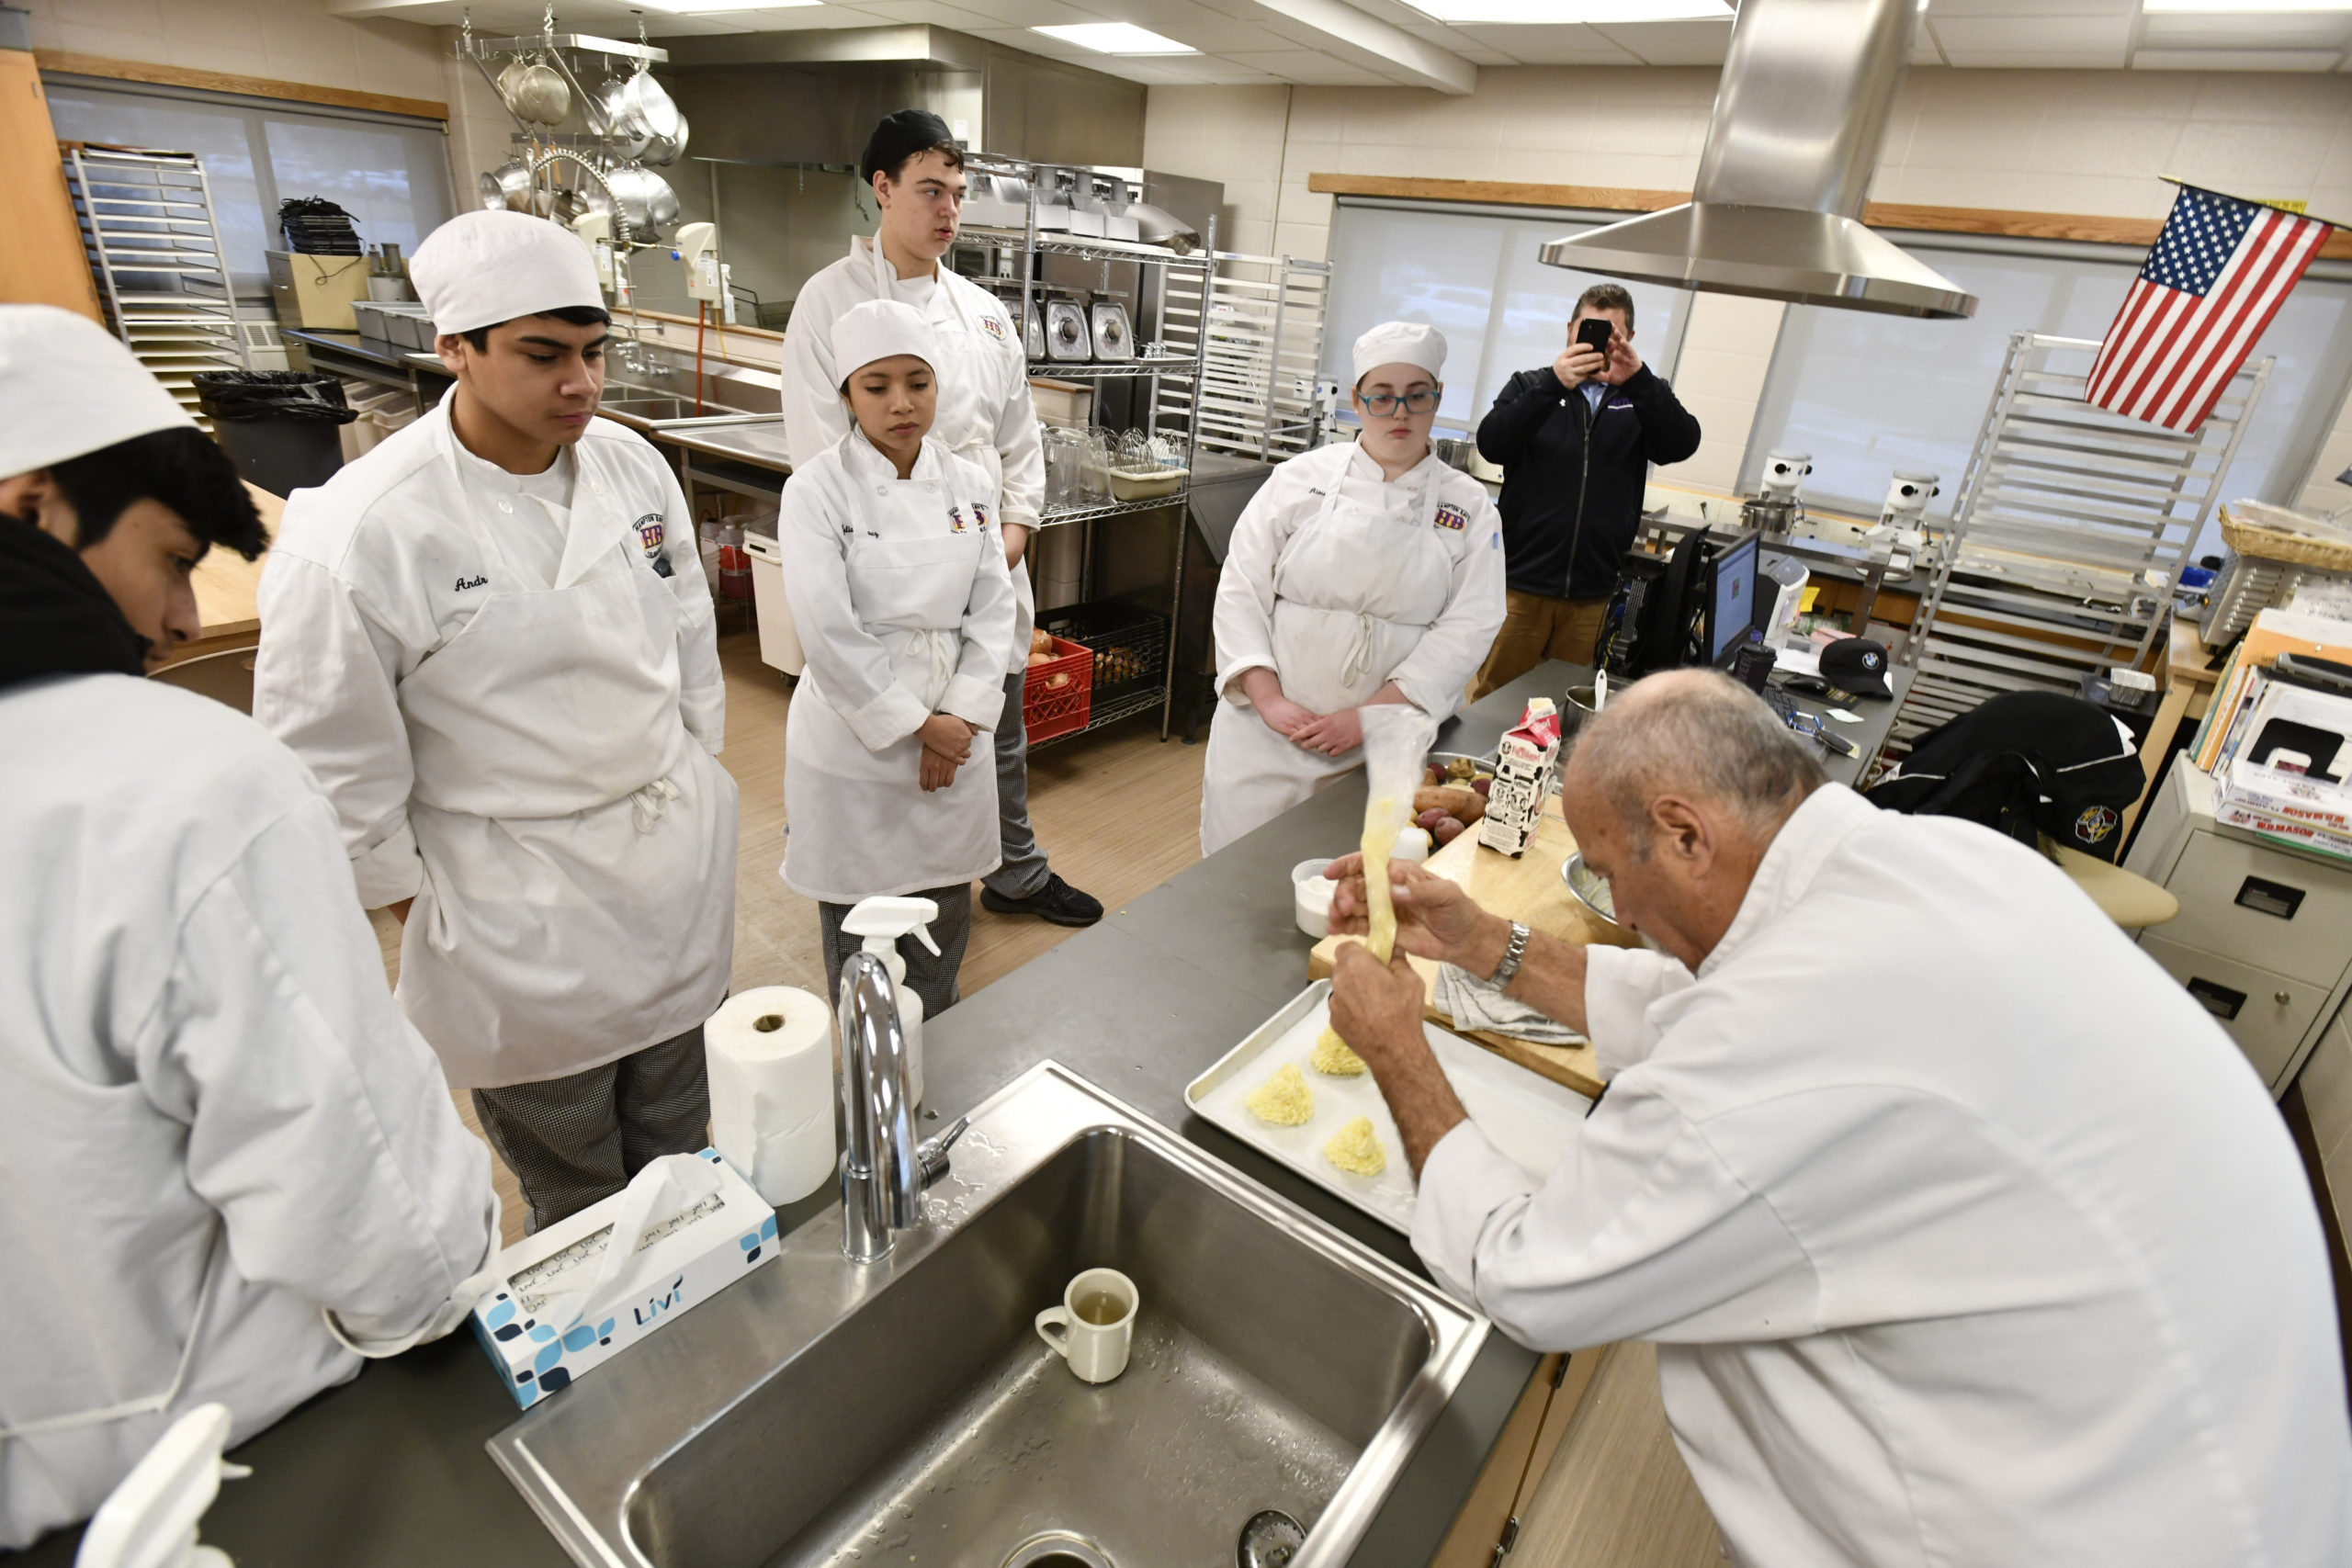 Chef Larry Weiss demonstrates the assignment during the culinary class at Hampton Bays High School on Thursday, February 6. DANA SHAW